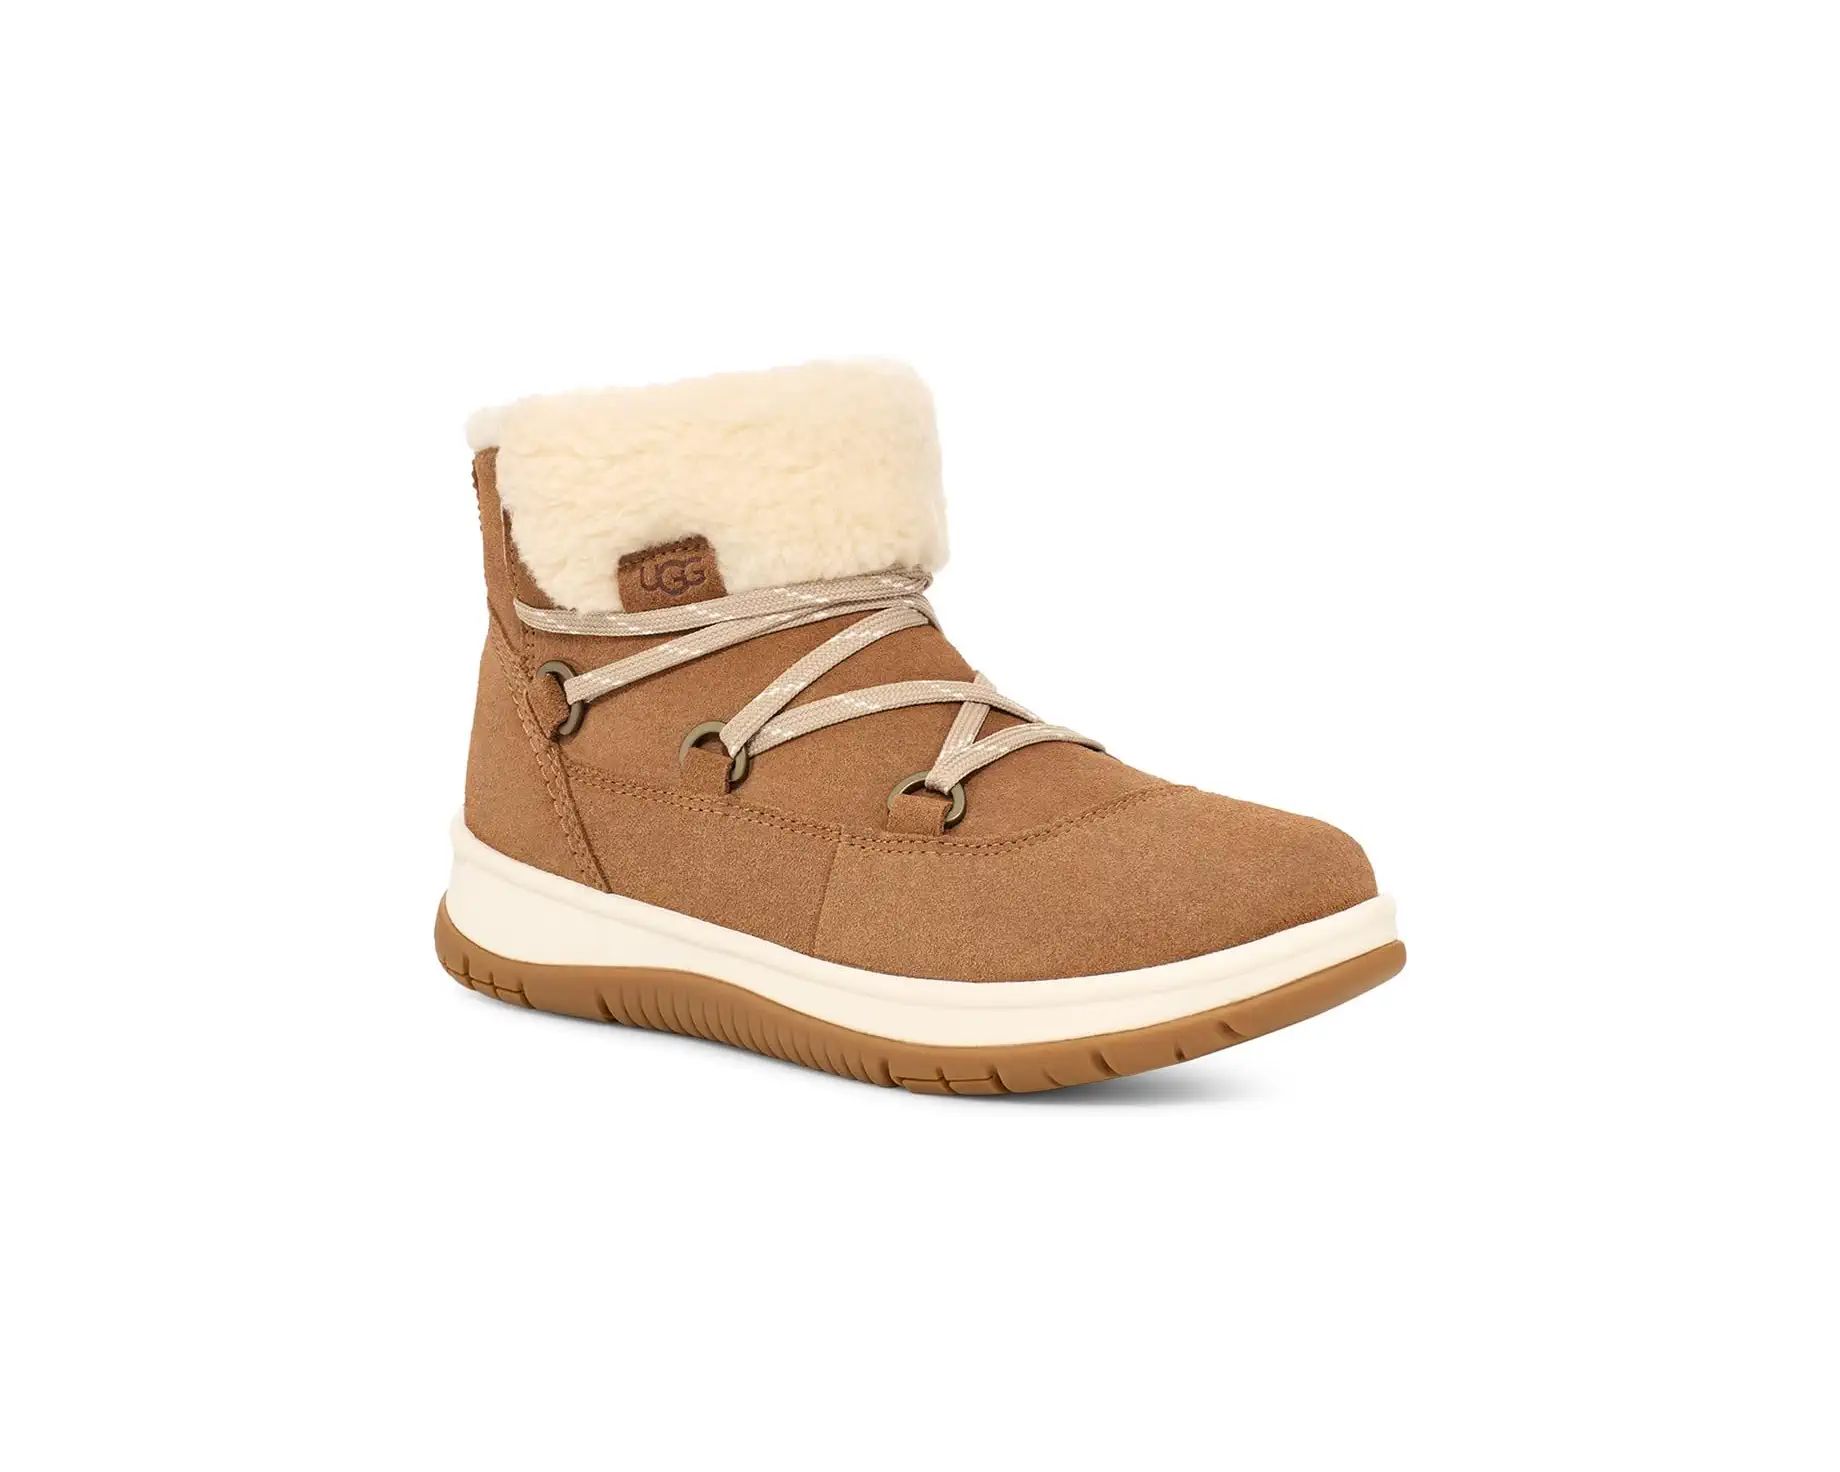 Lakesider Heritage Lace | Zappos